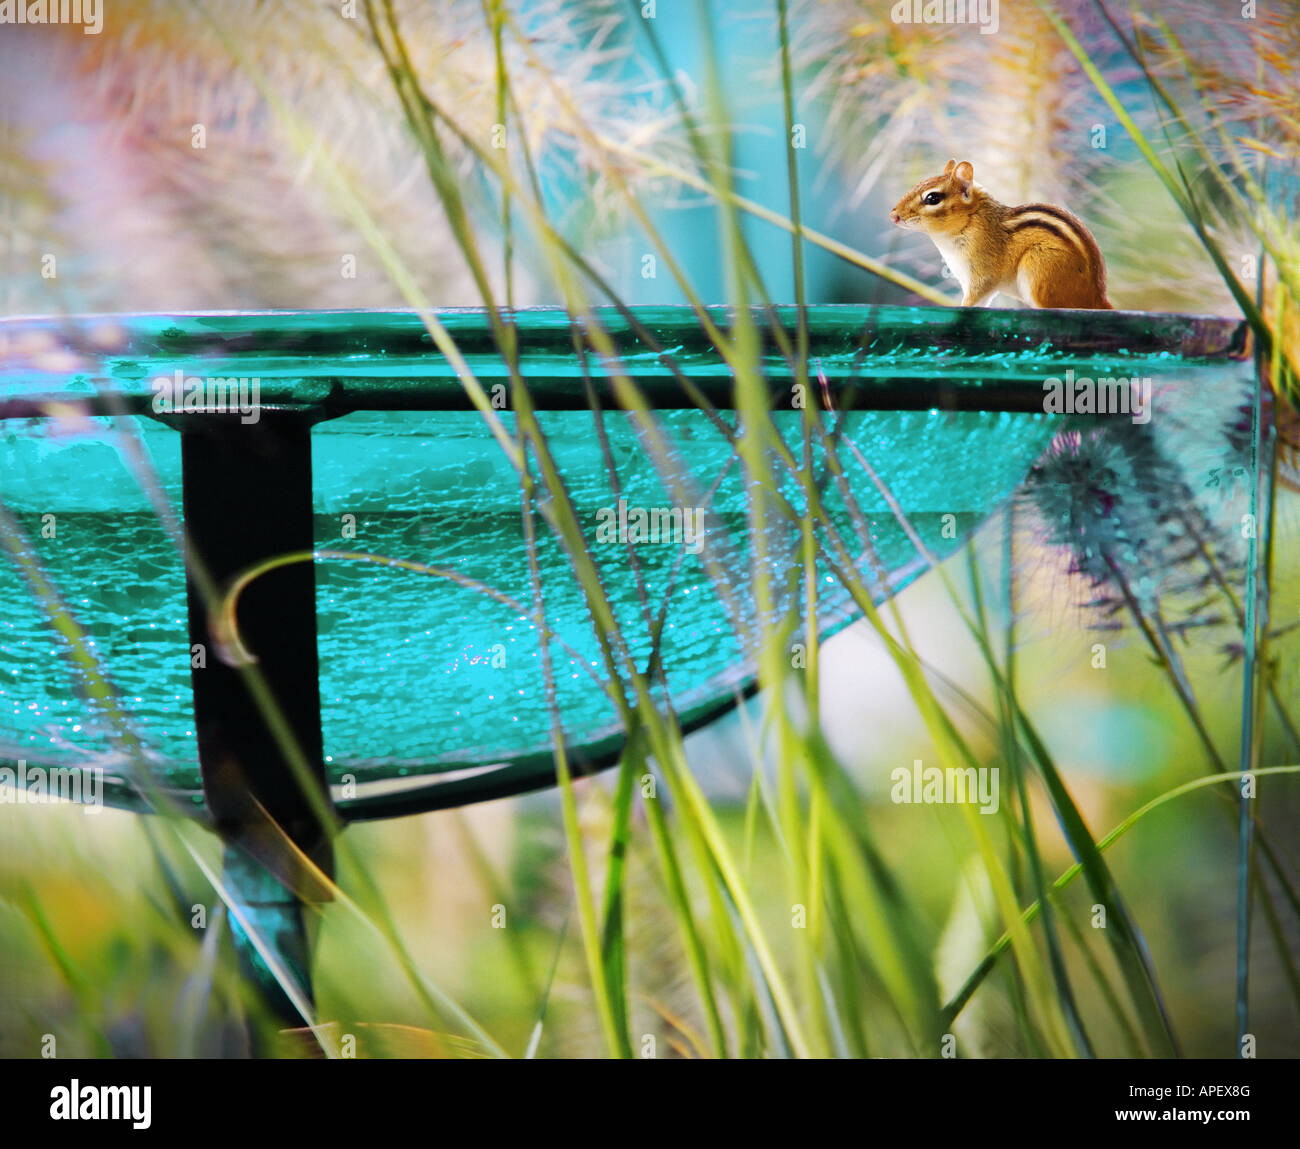 Pygmy squirrel sitting on rim of glass garden bird feeder, surrounded by tall grass. Stock Photo